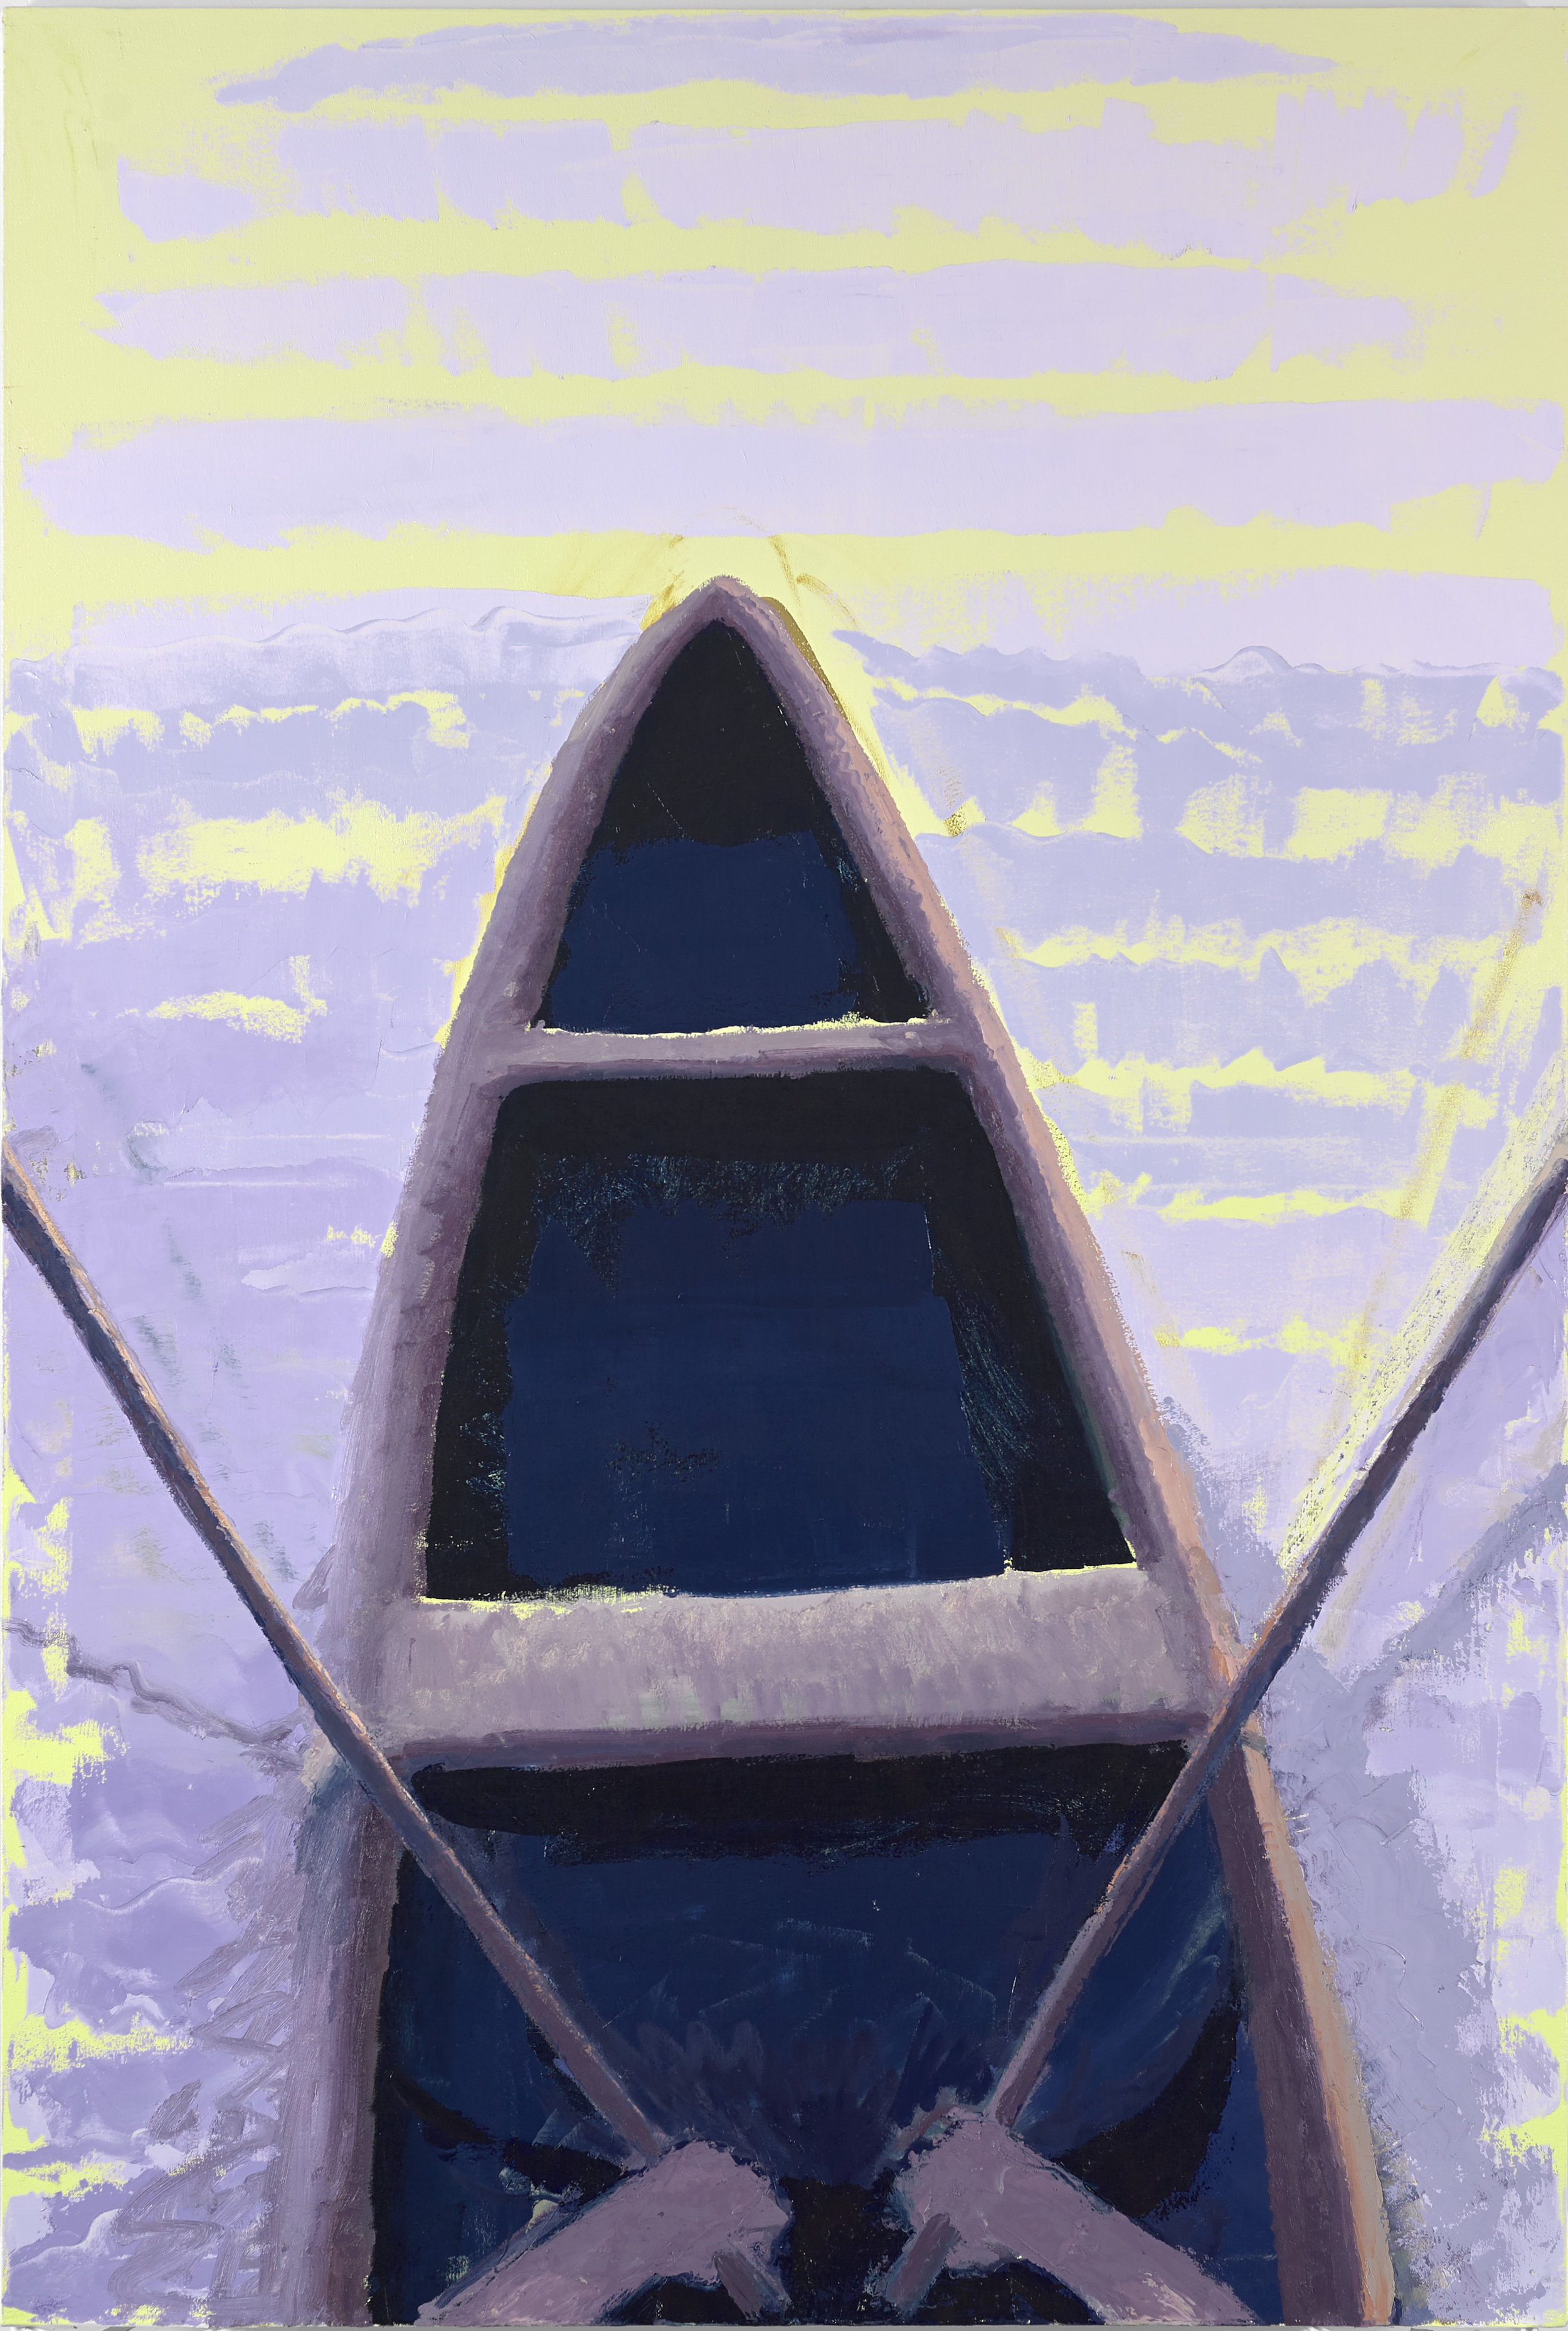 Boat, 6’x4’, oil on canvas, 2019